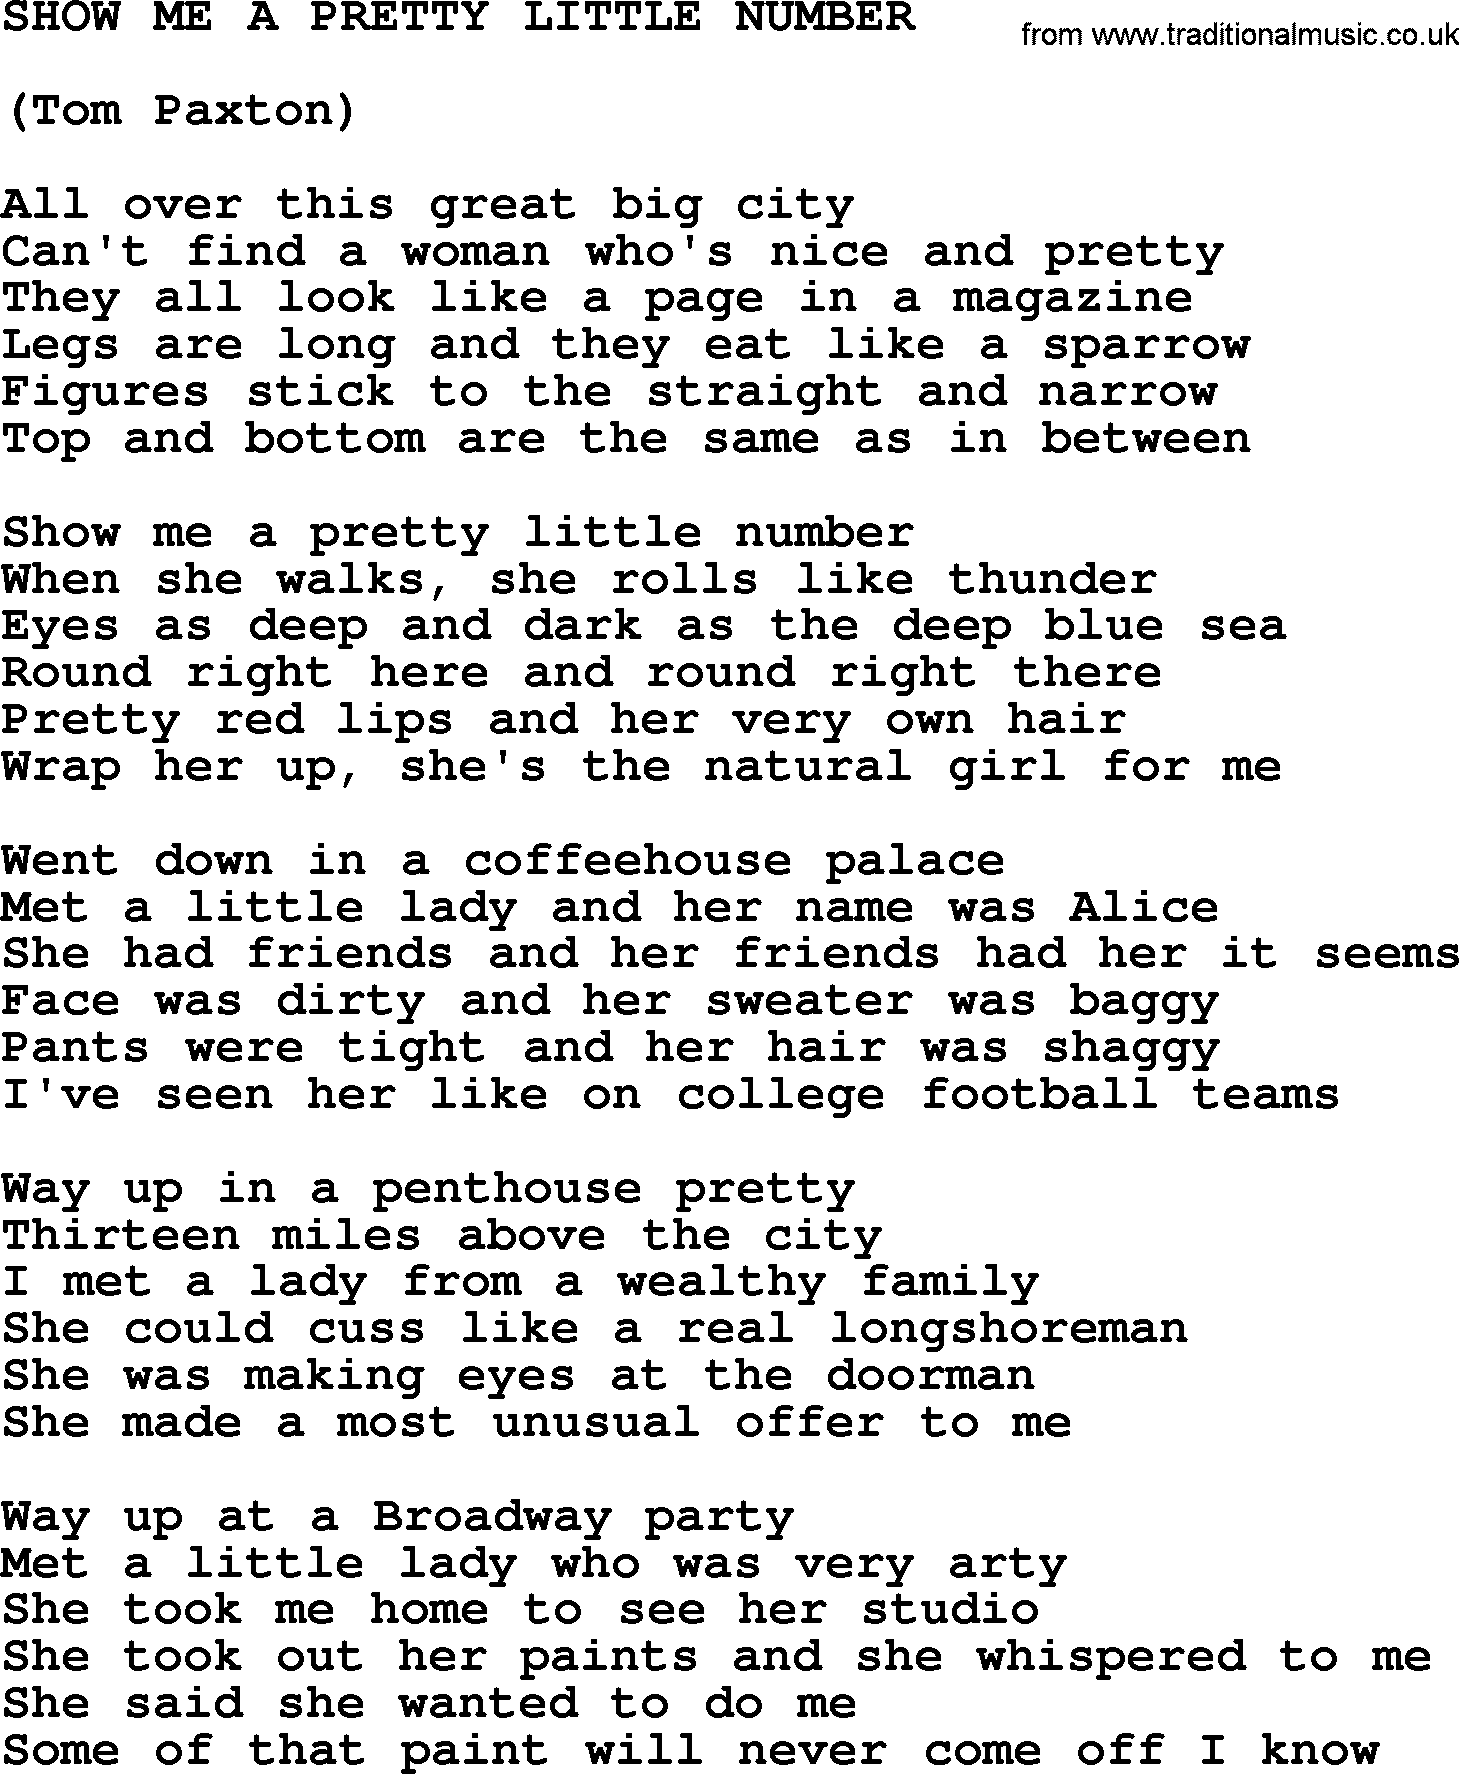 Tom Paxton song: Show Me A Pretty Little Number, lyrics